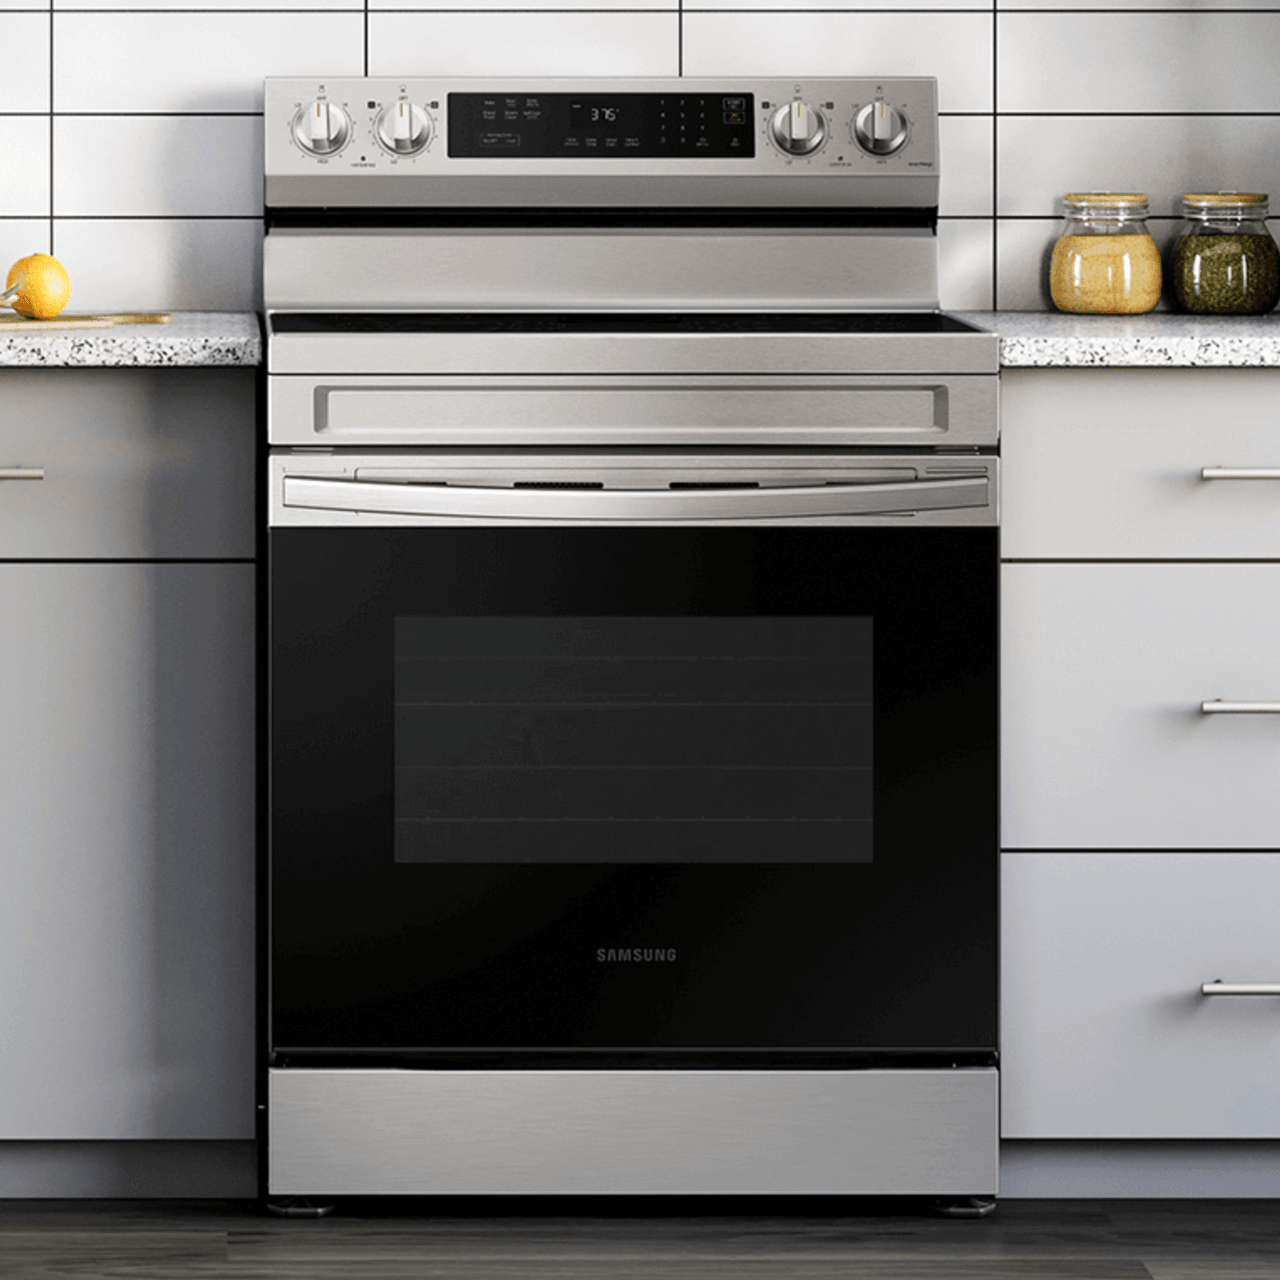 Samsung 6.3 cu. ft. Smart Freestanding Electric Range with Rapid Boil & Self Clean - NE63A6311SS